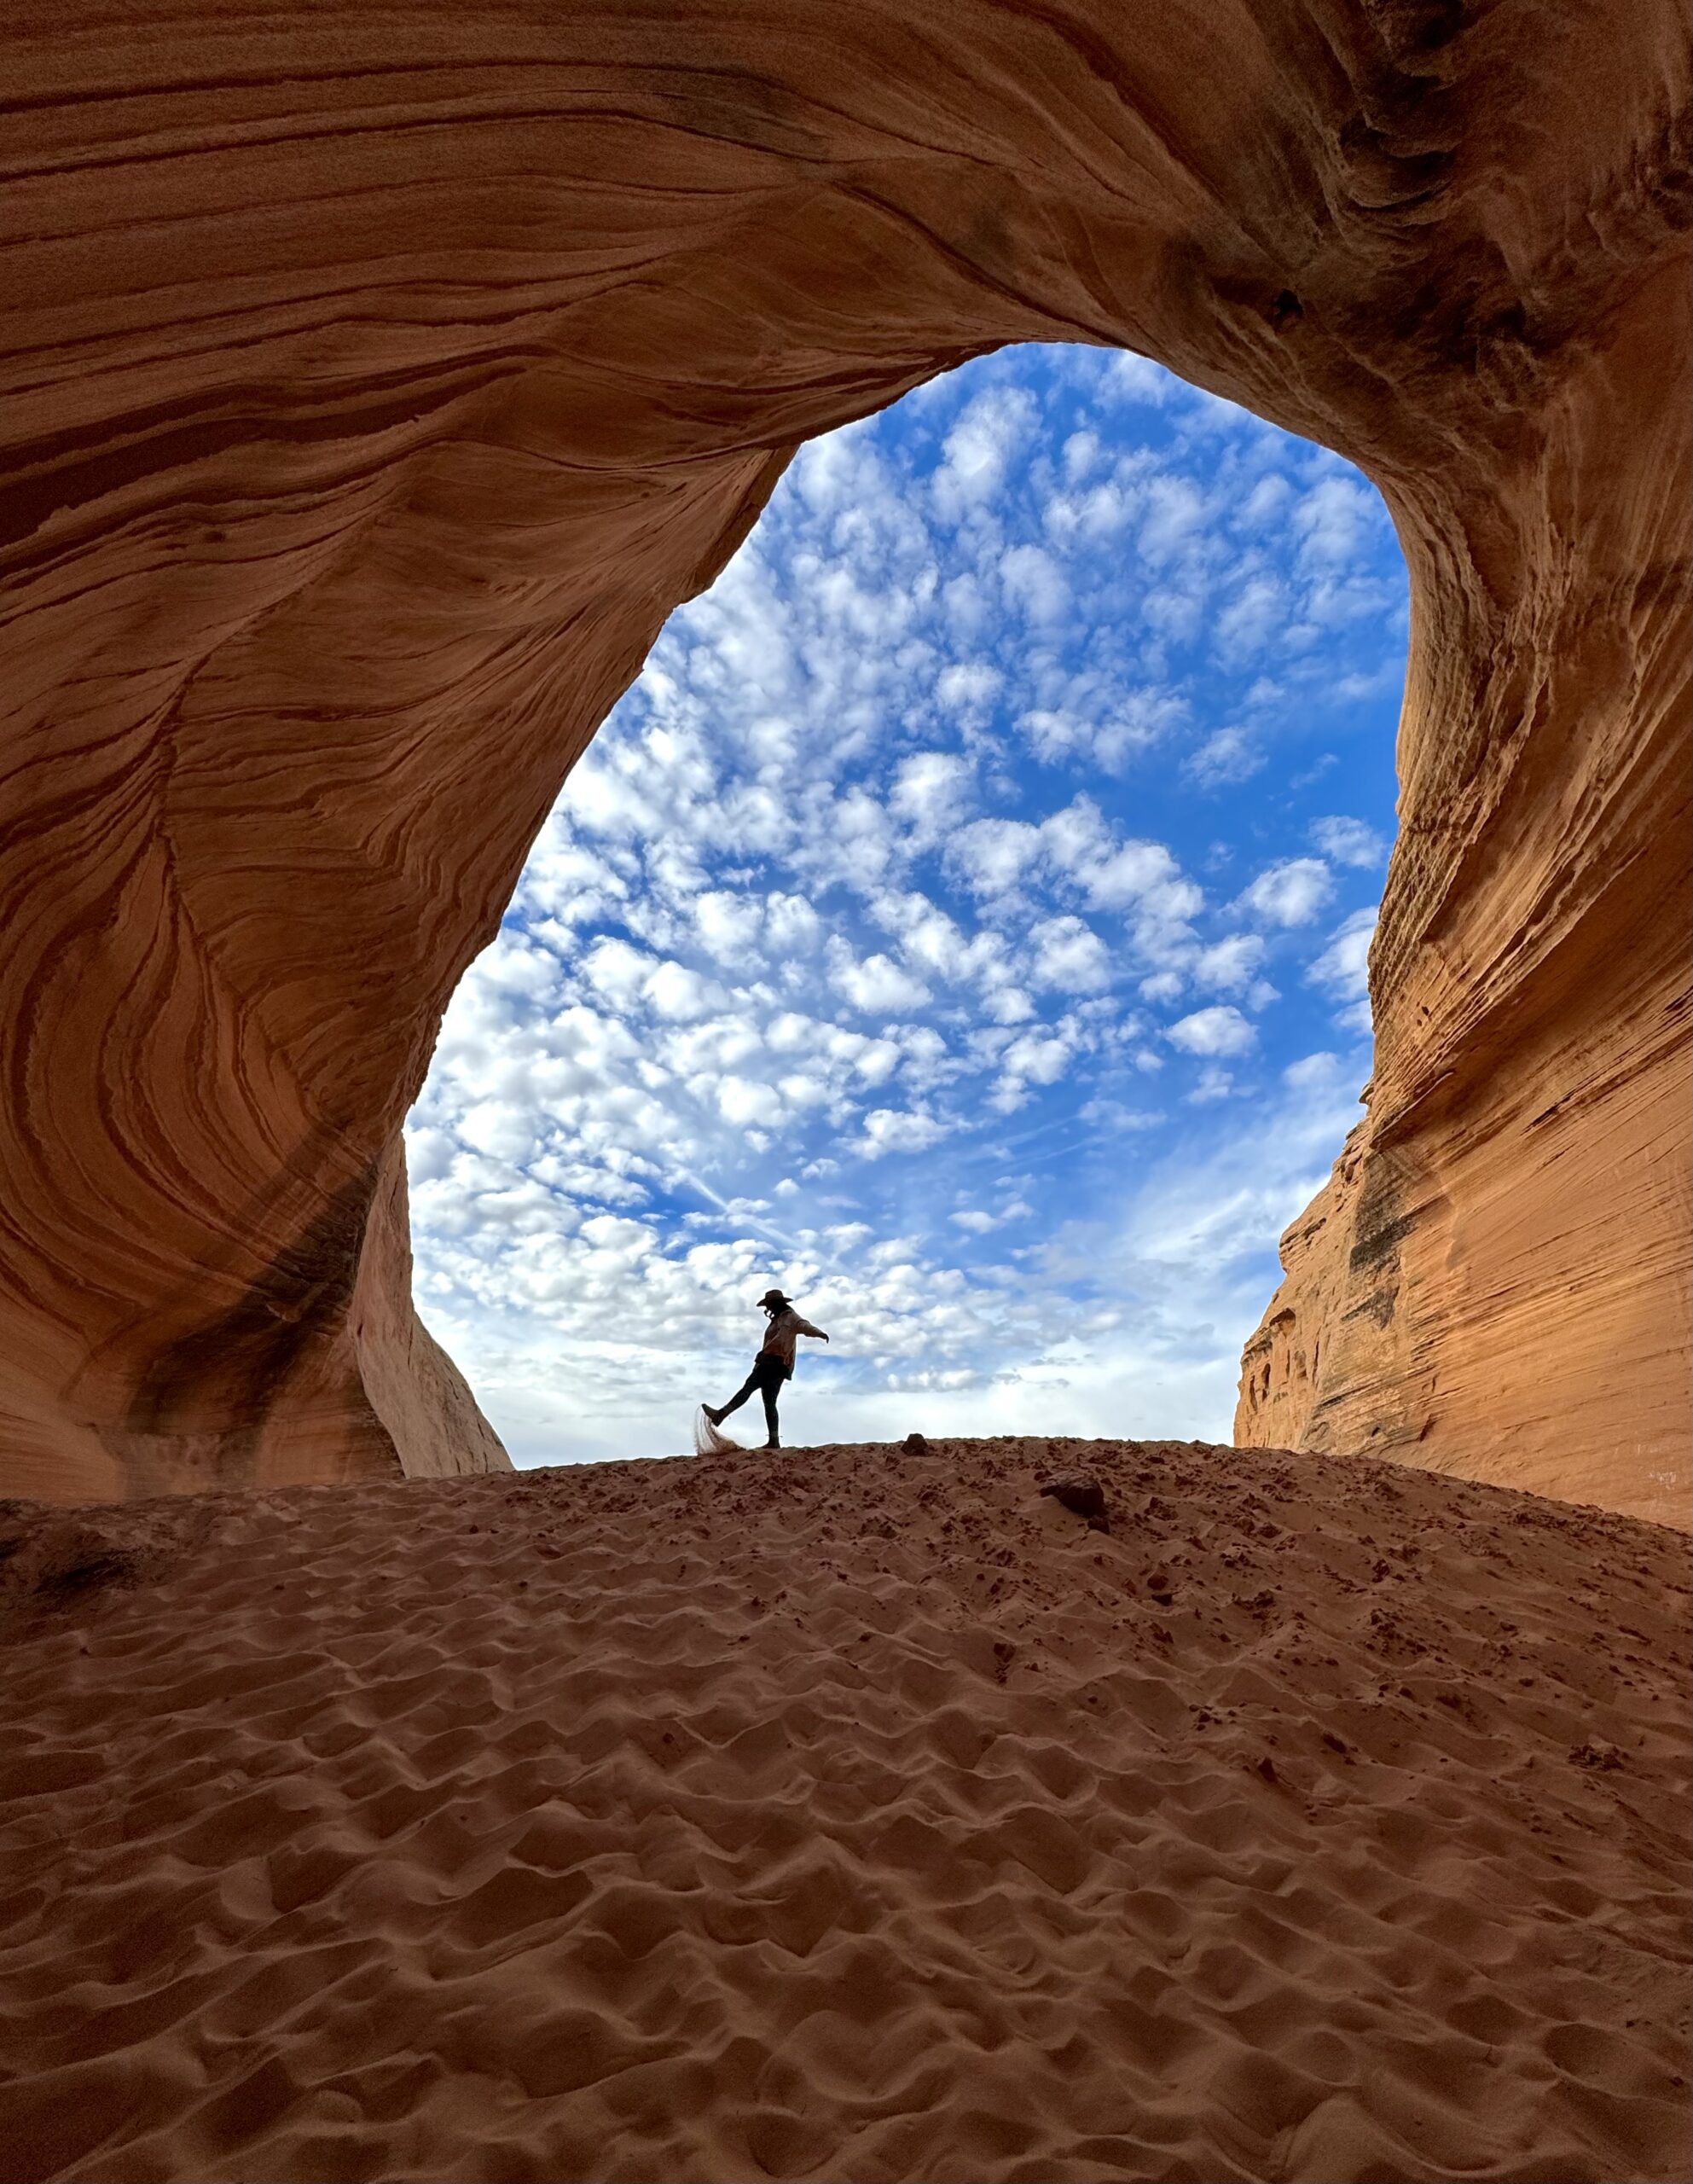 girl kicking sand in a sandstone cave